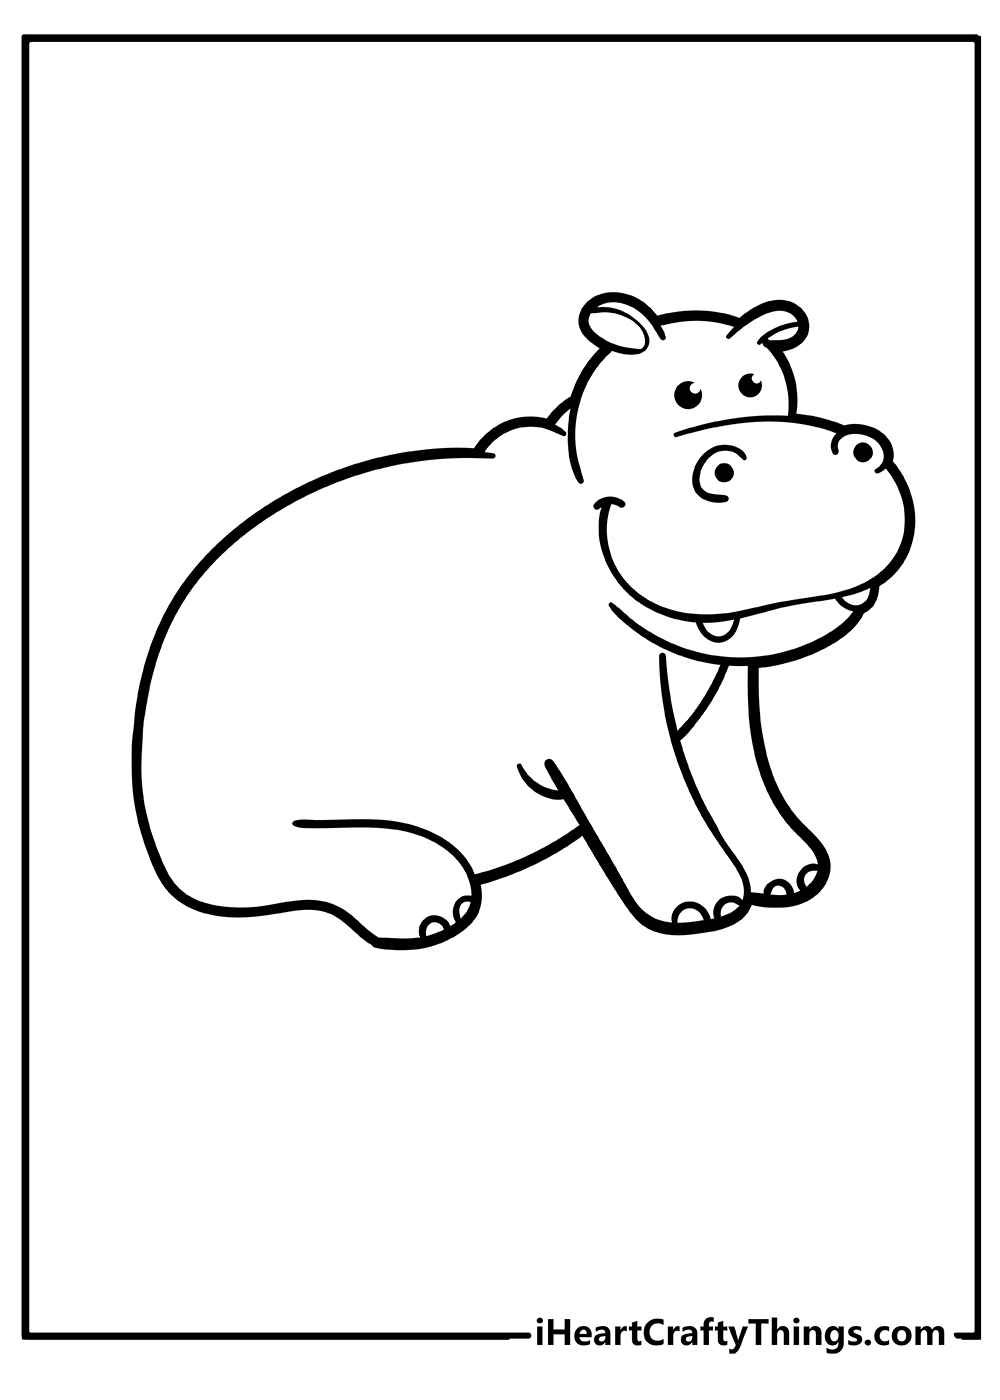 Hippo Coloring Sheet for children free download